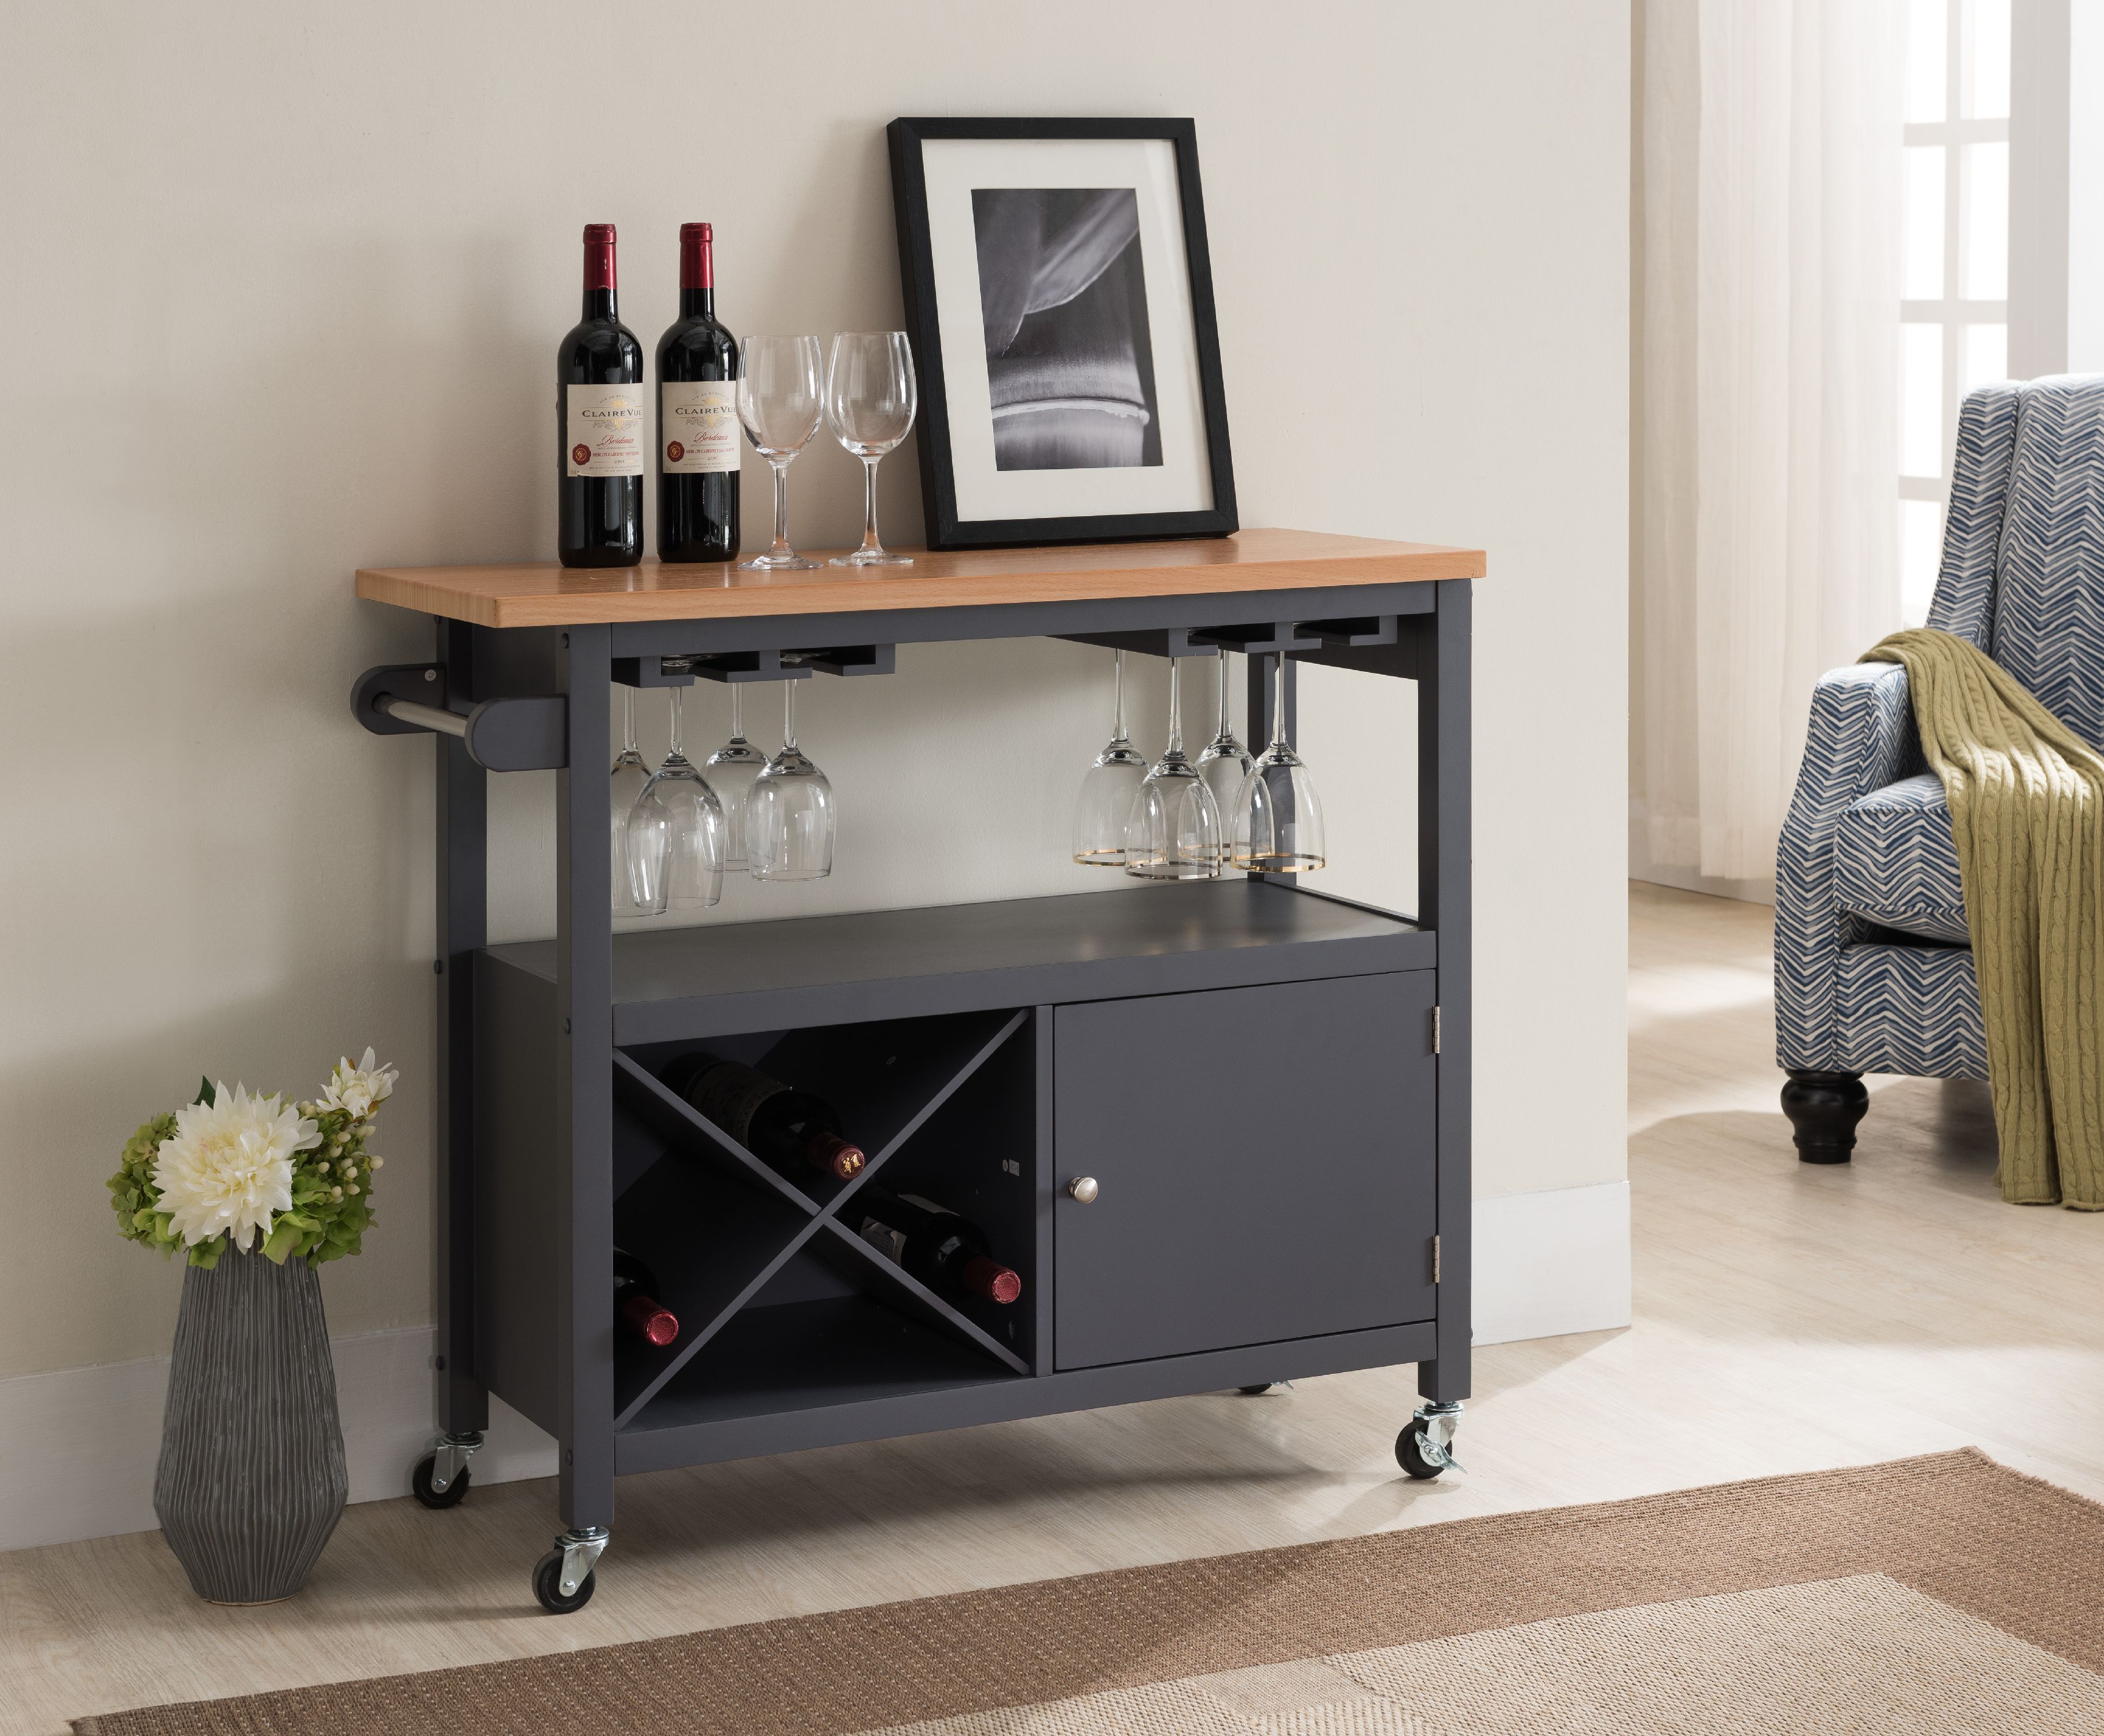 Jose Portable Kitchen Island Serving Cart With Storage Cabinet & Wine Rack, Gray & Natural Wood, Transitional - image 1 of 7